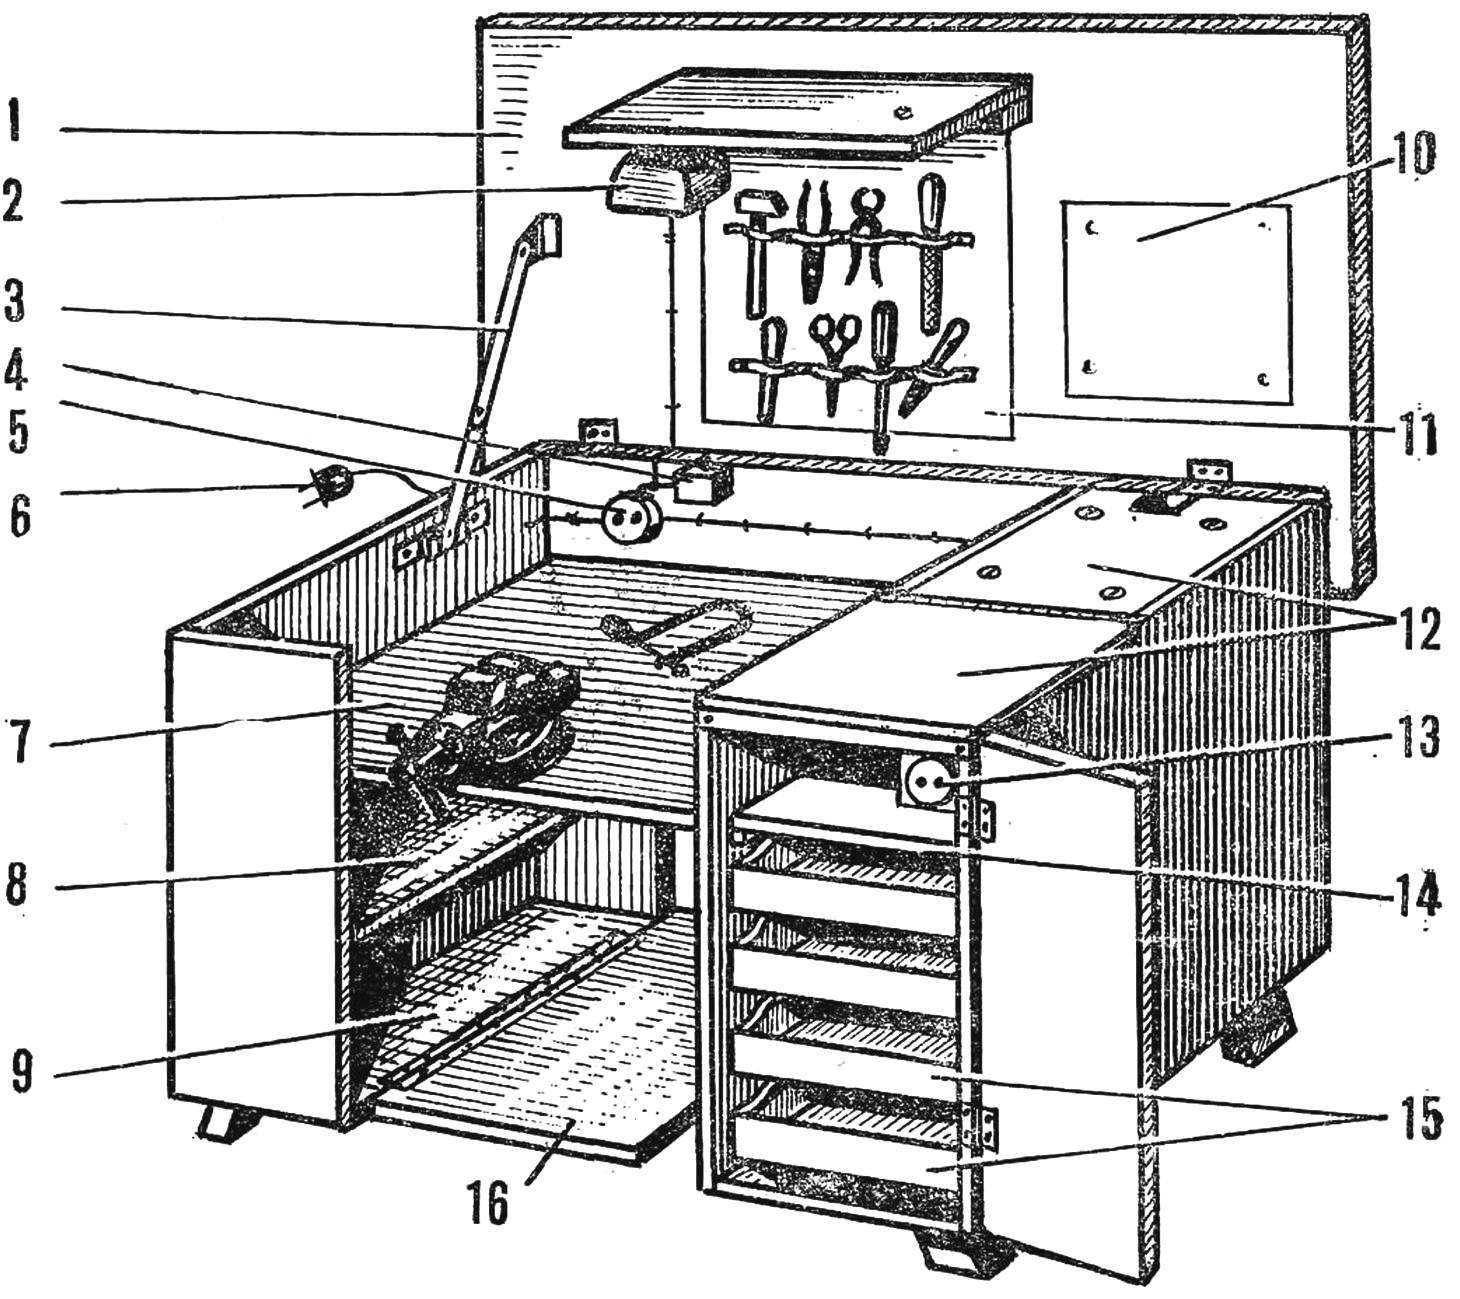 Fig. 2. Table-workshop in working position